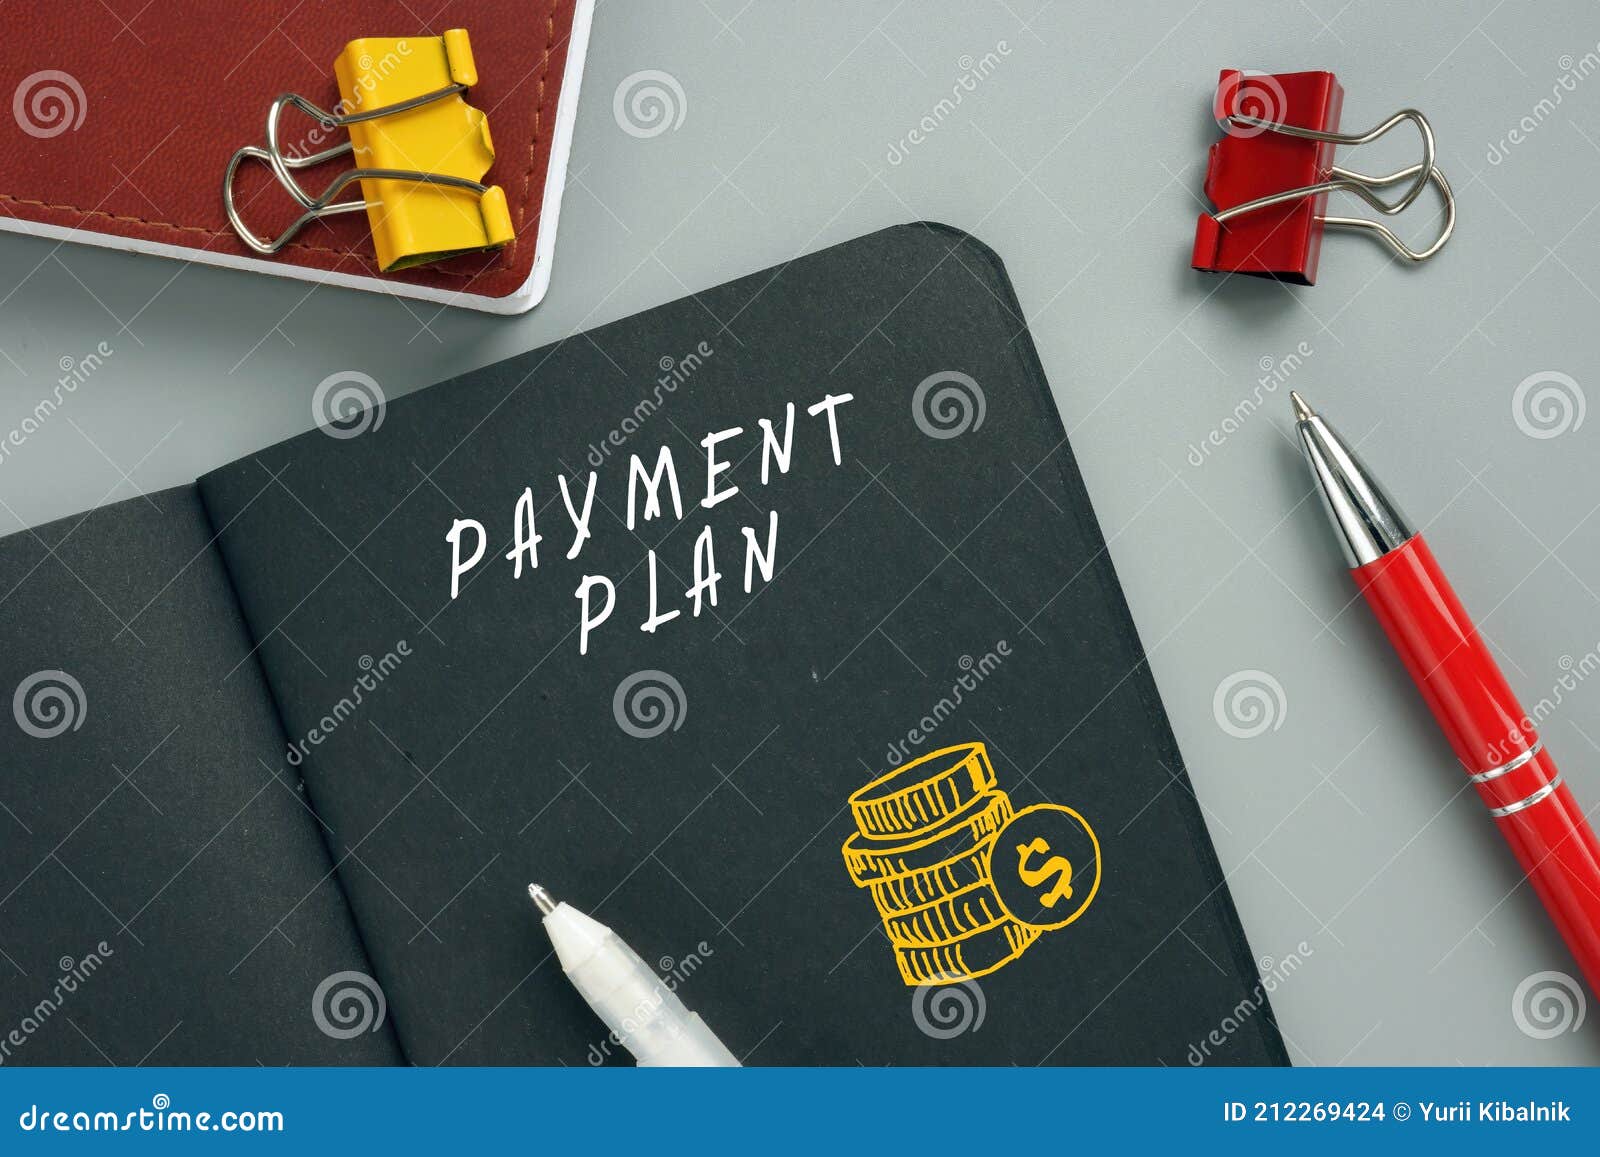 financial concept about payment plan with sign on the page. aÃÂ termÃÂ payment planÃÂ involves receiving equal monthlyÃÂ paymentsÃÂ 